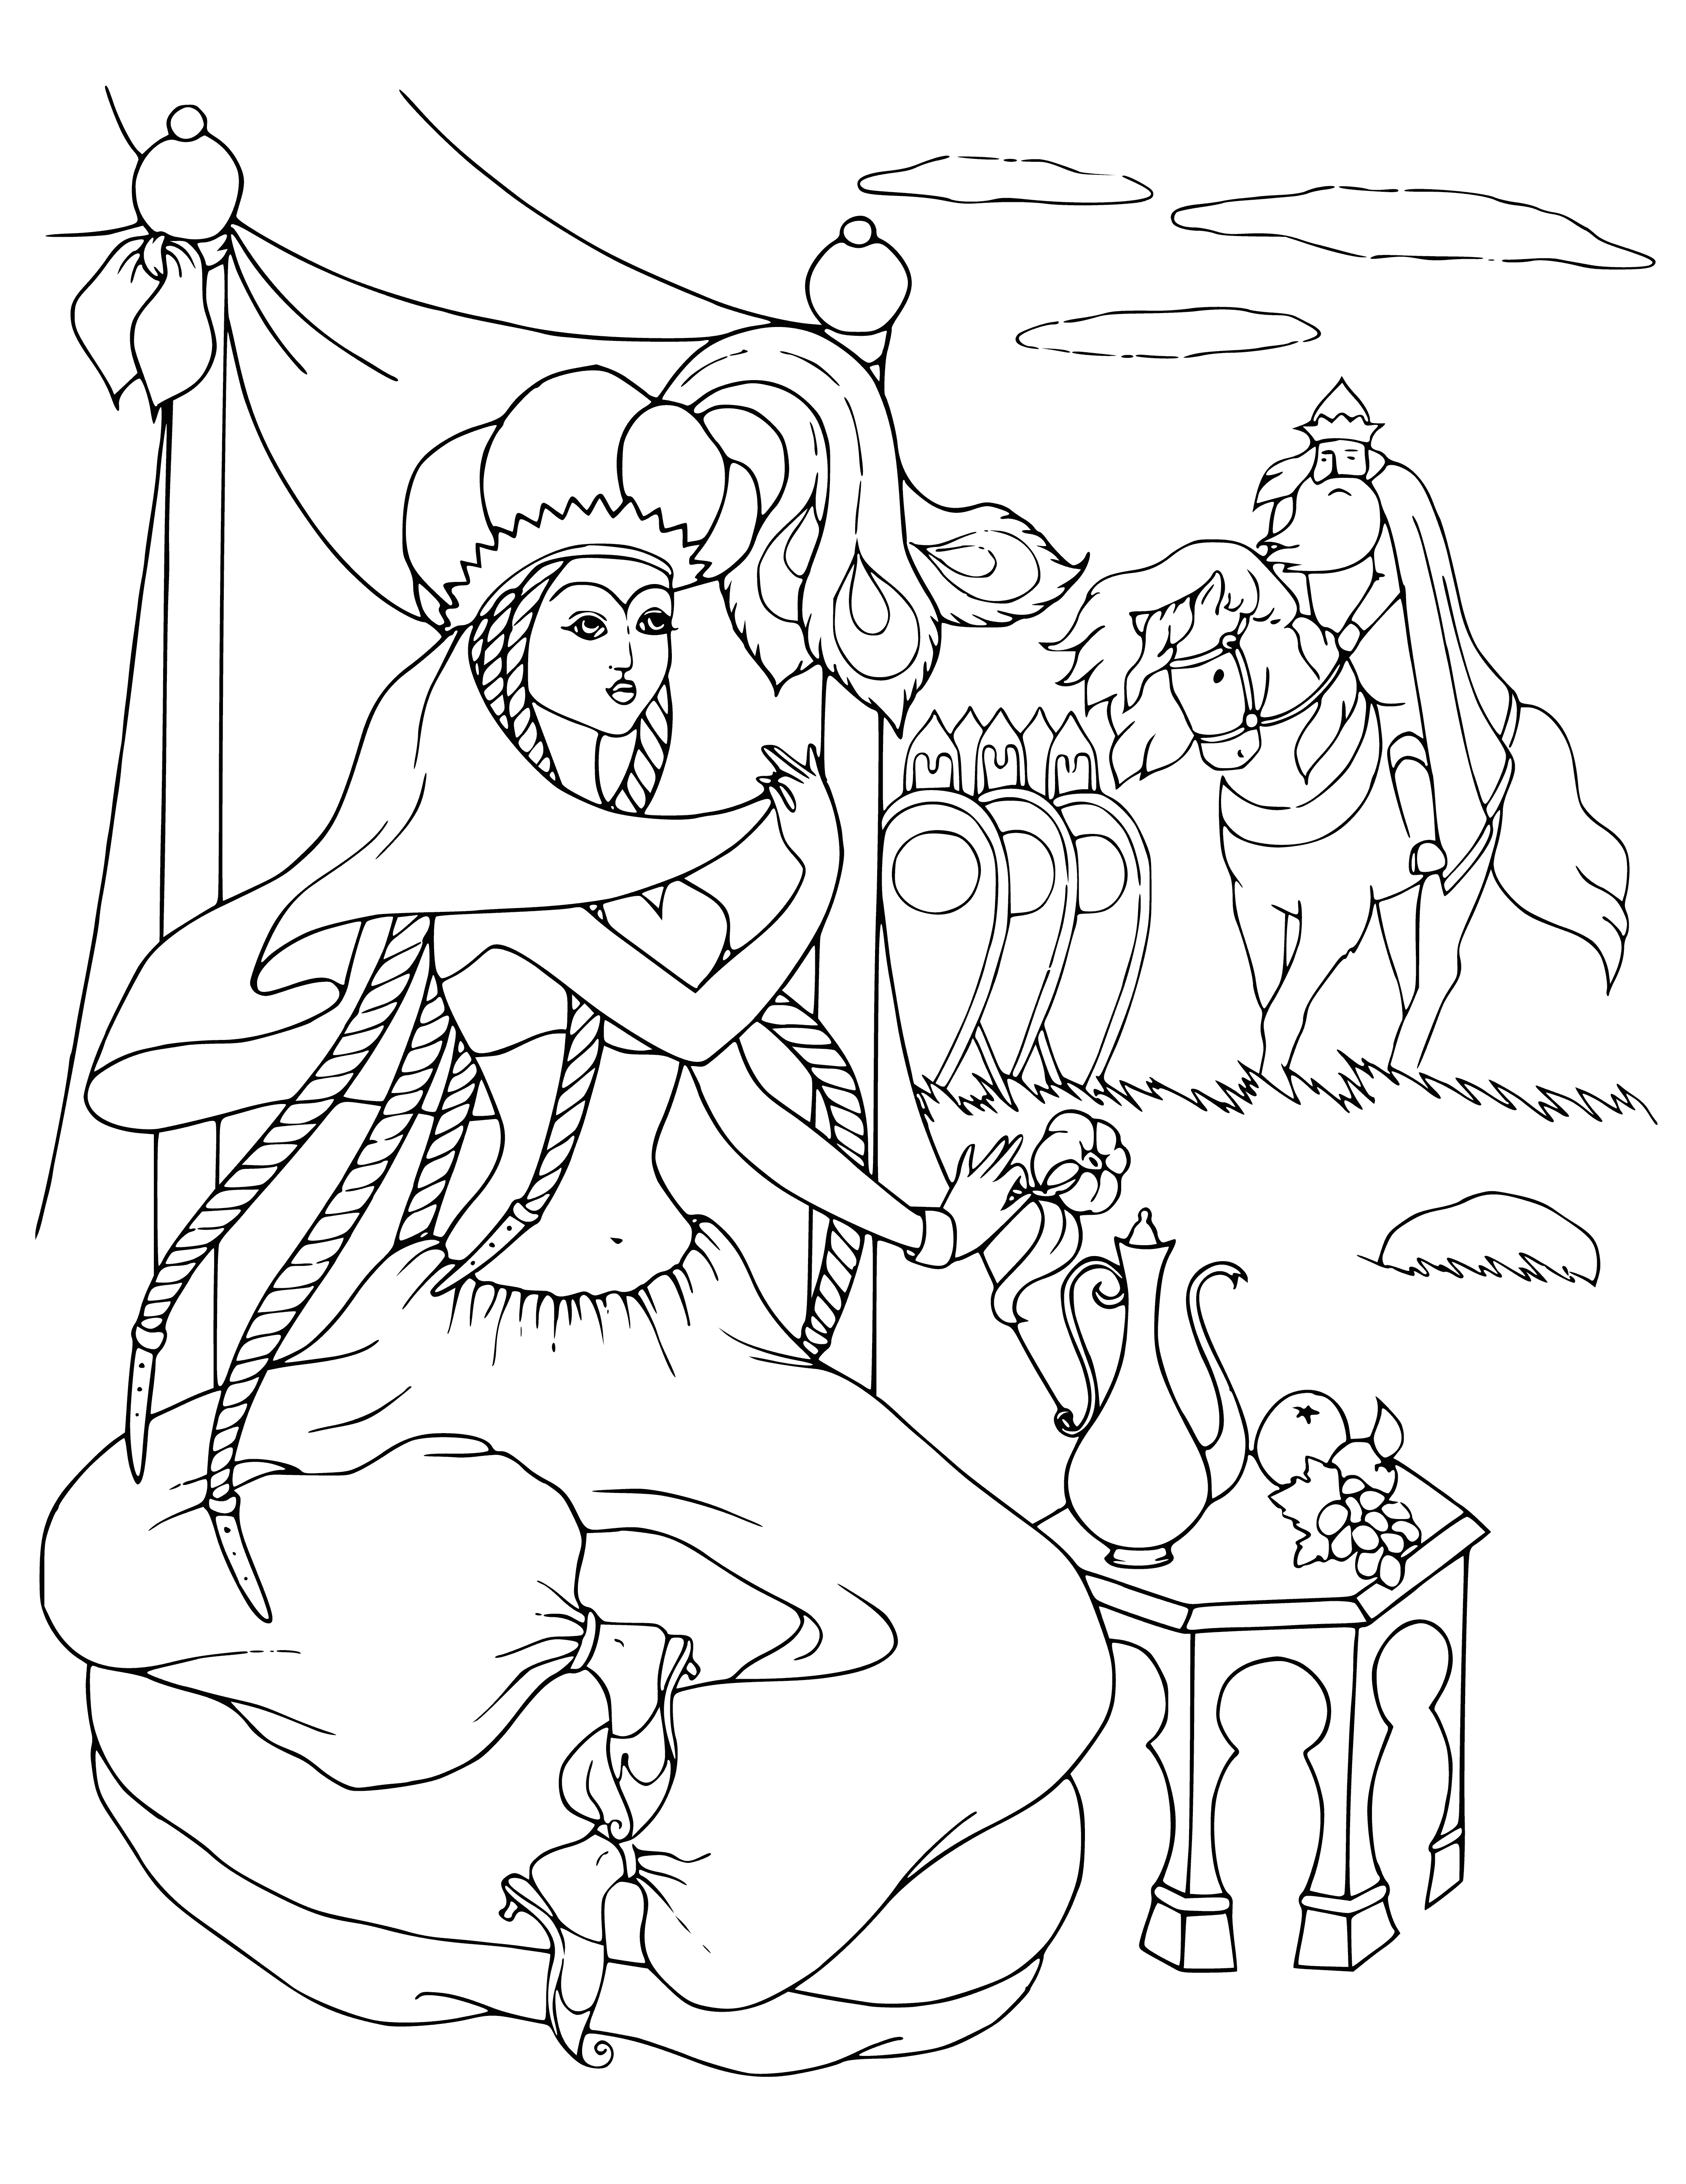 Shamakhan queen coloring page